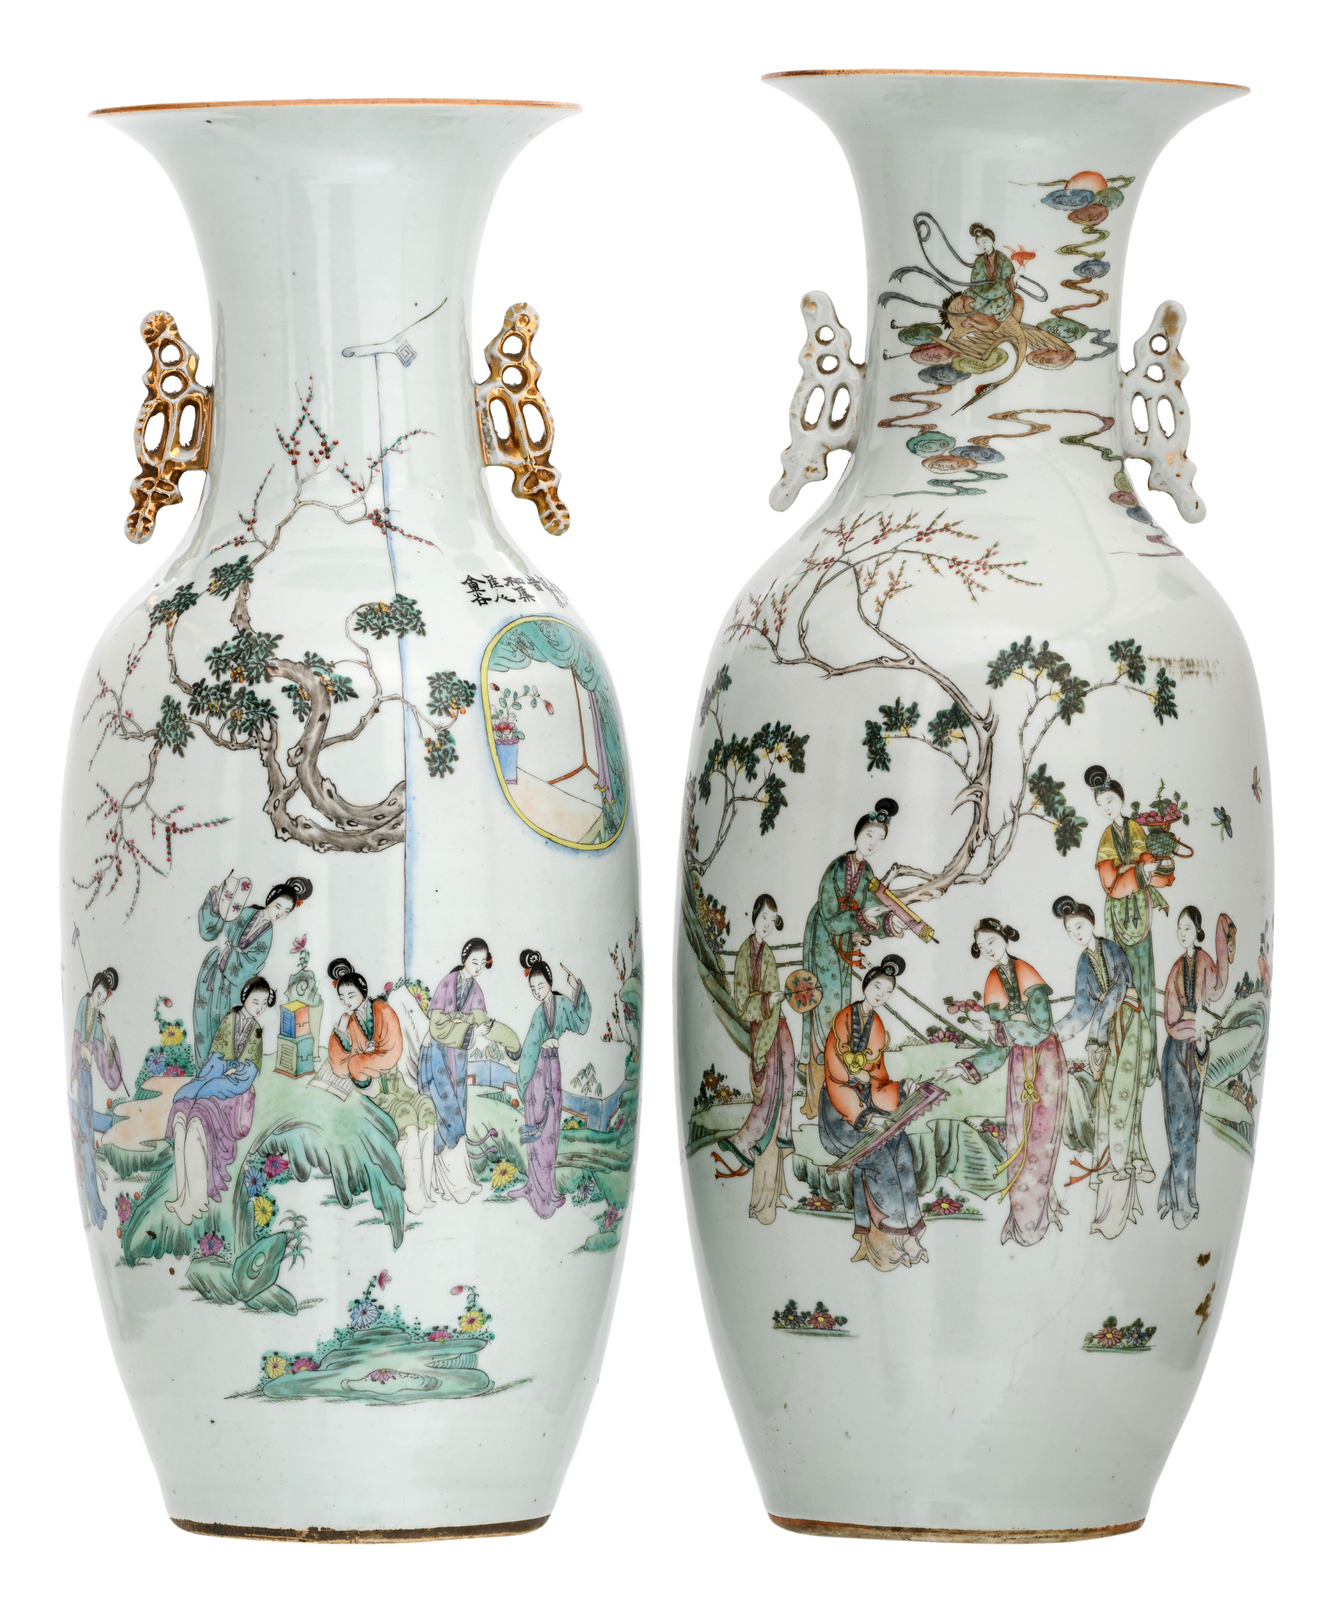 Two Chinese polychrome decorated vases with a gallant garden scene and calligraphic texts, one